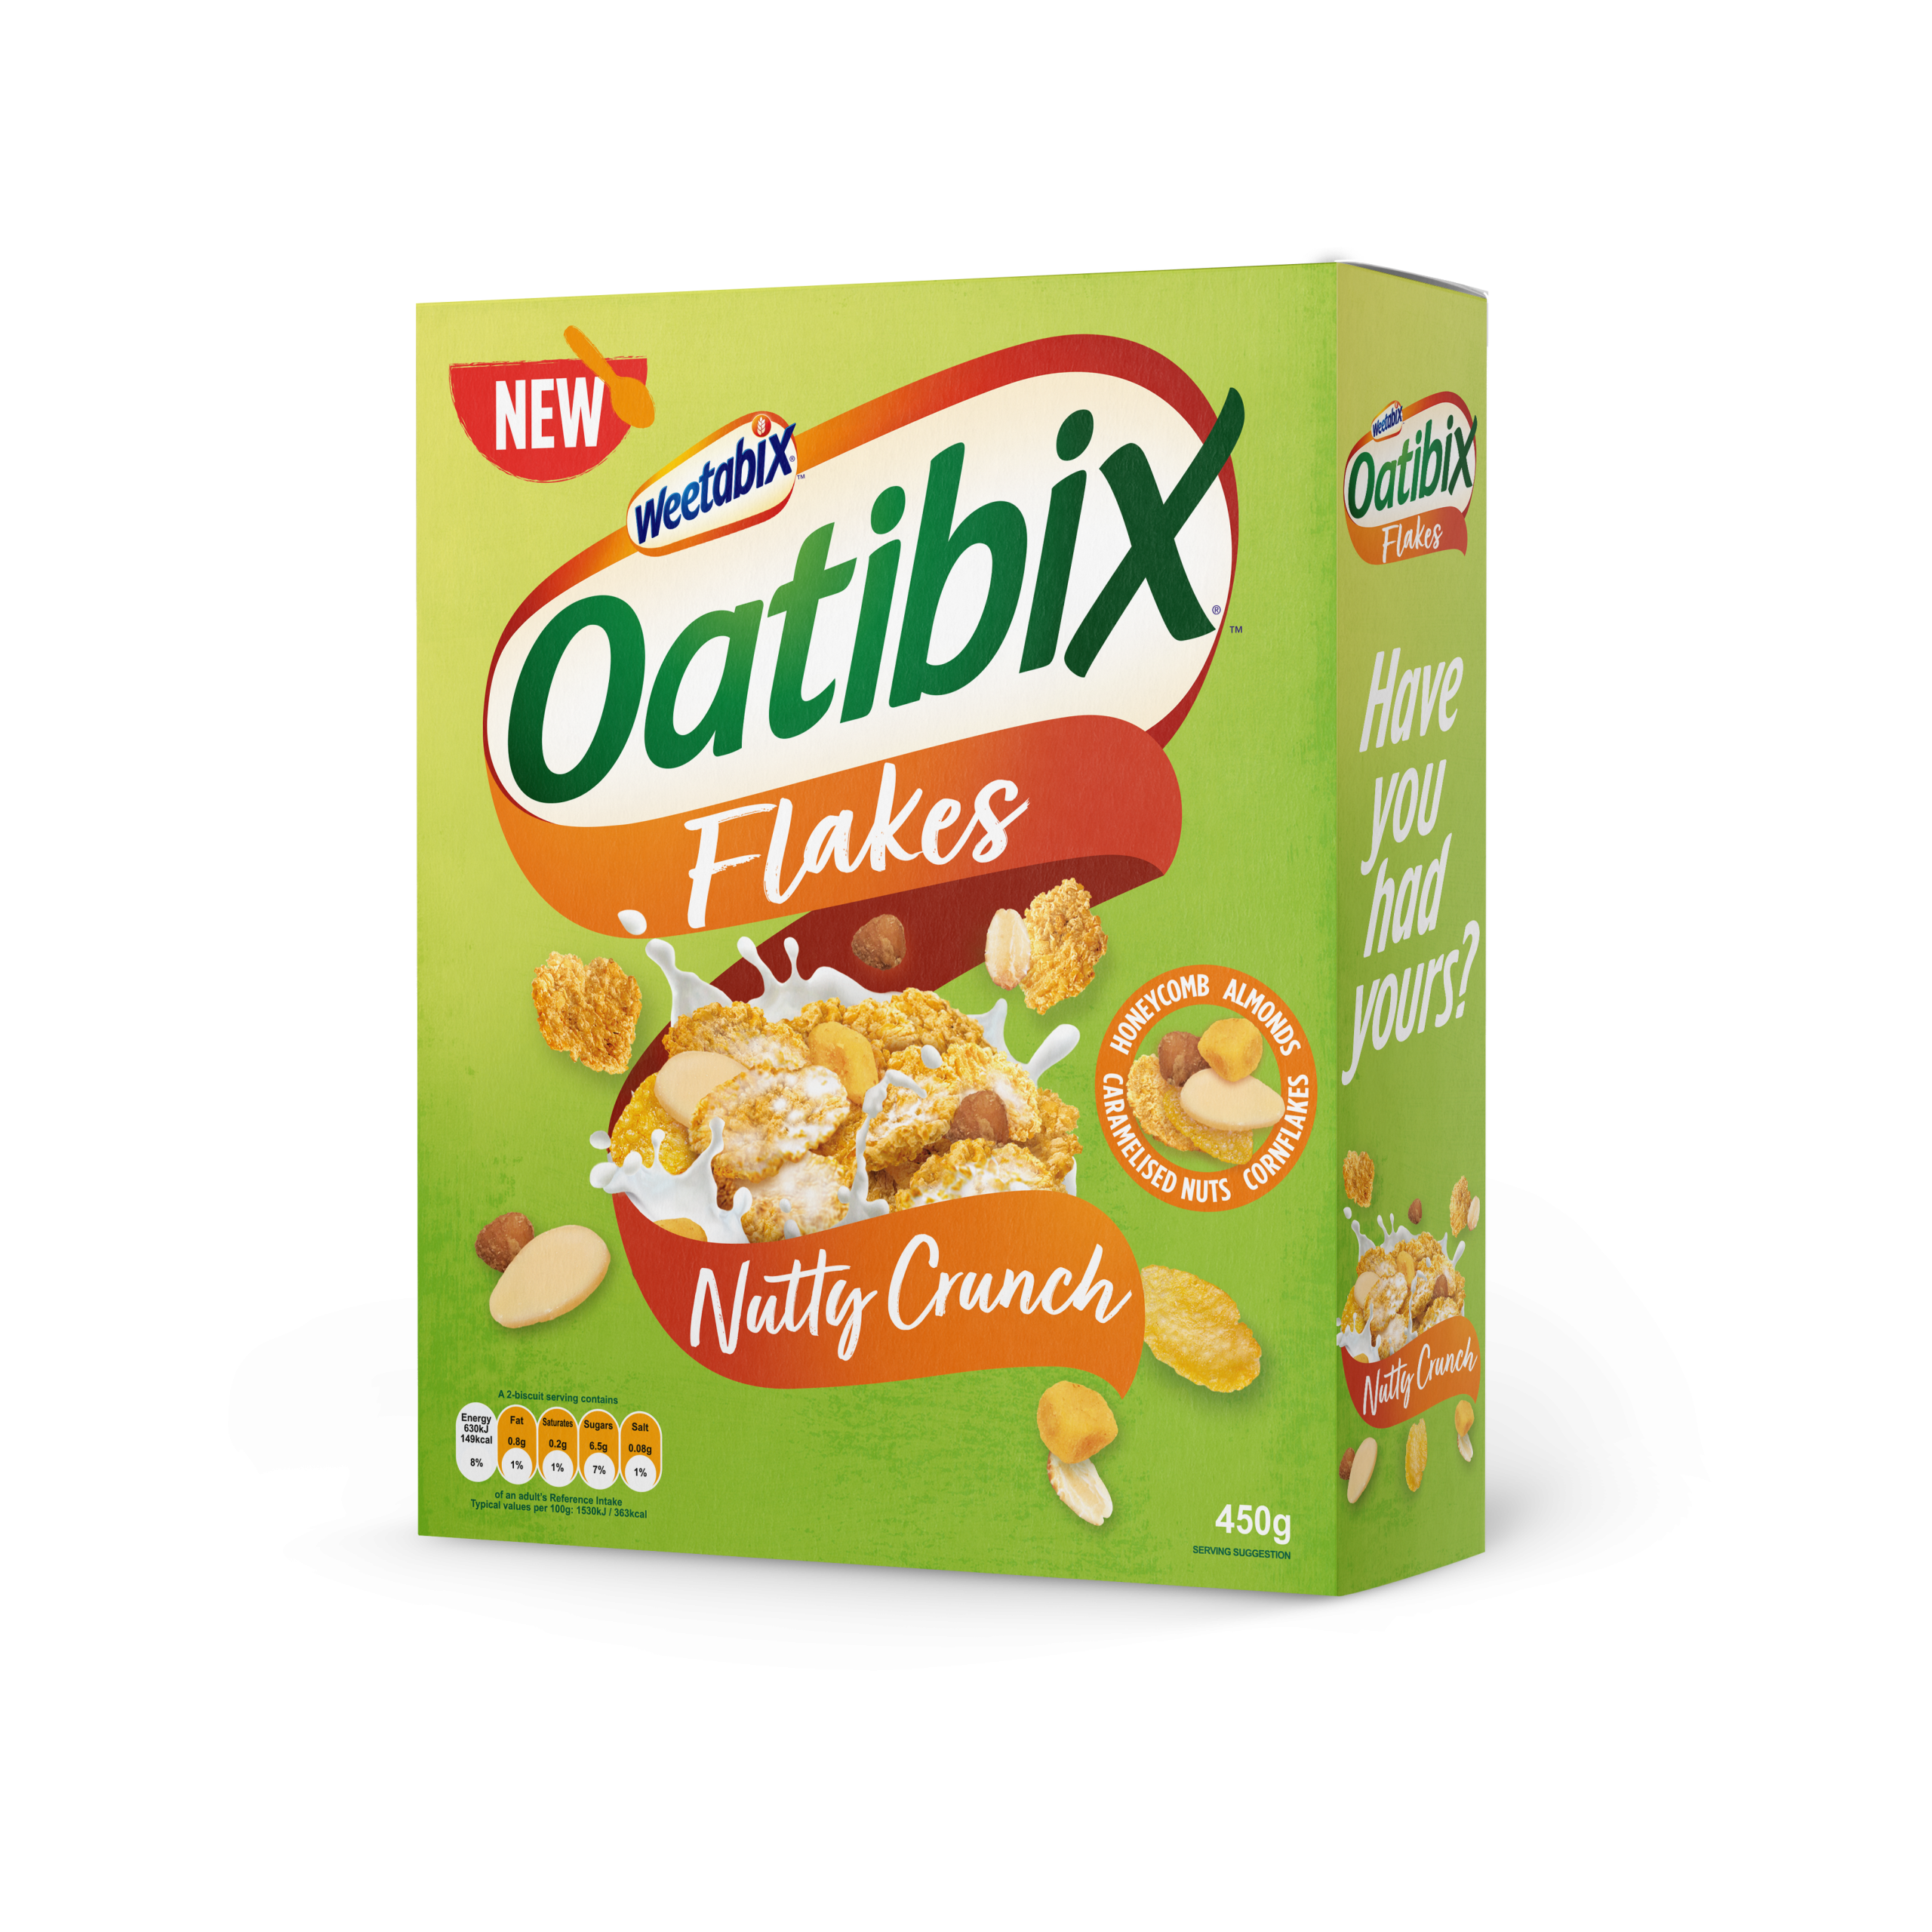 New Nutty Crunch joins the refreshed Oatibix family